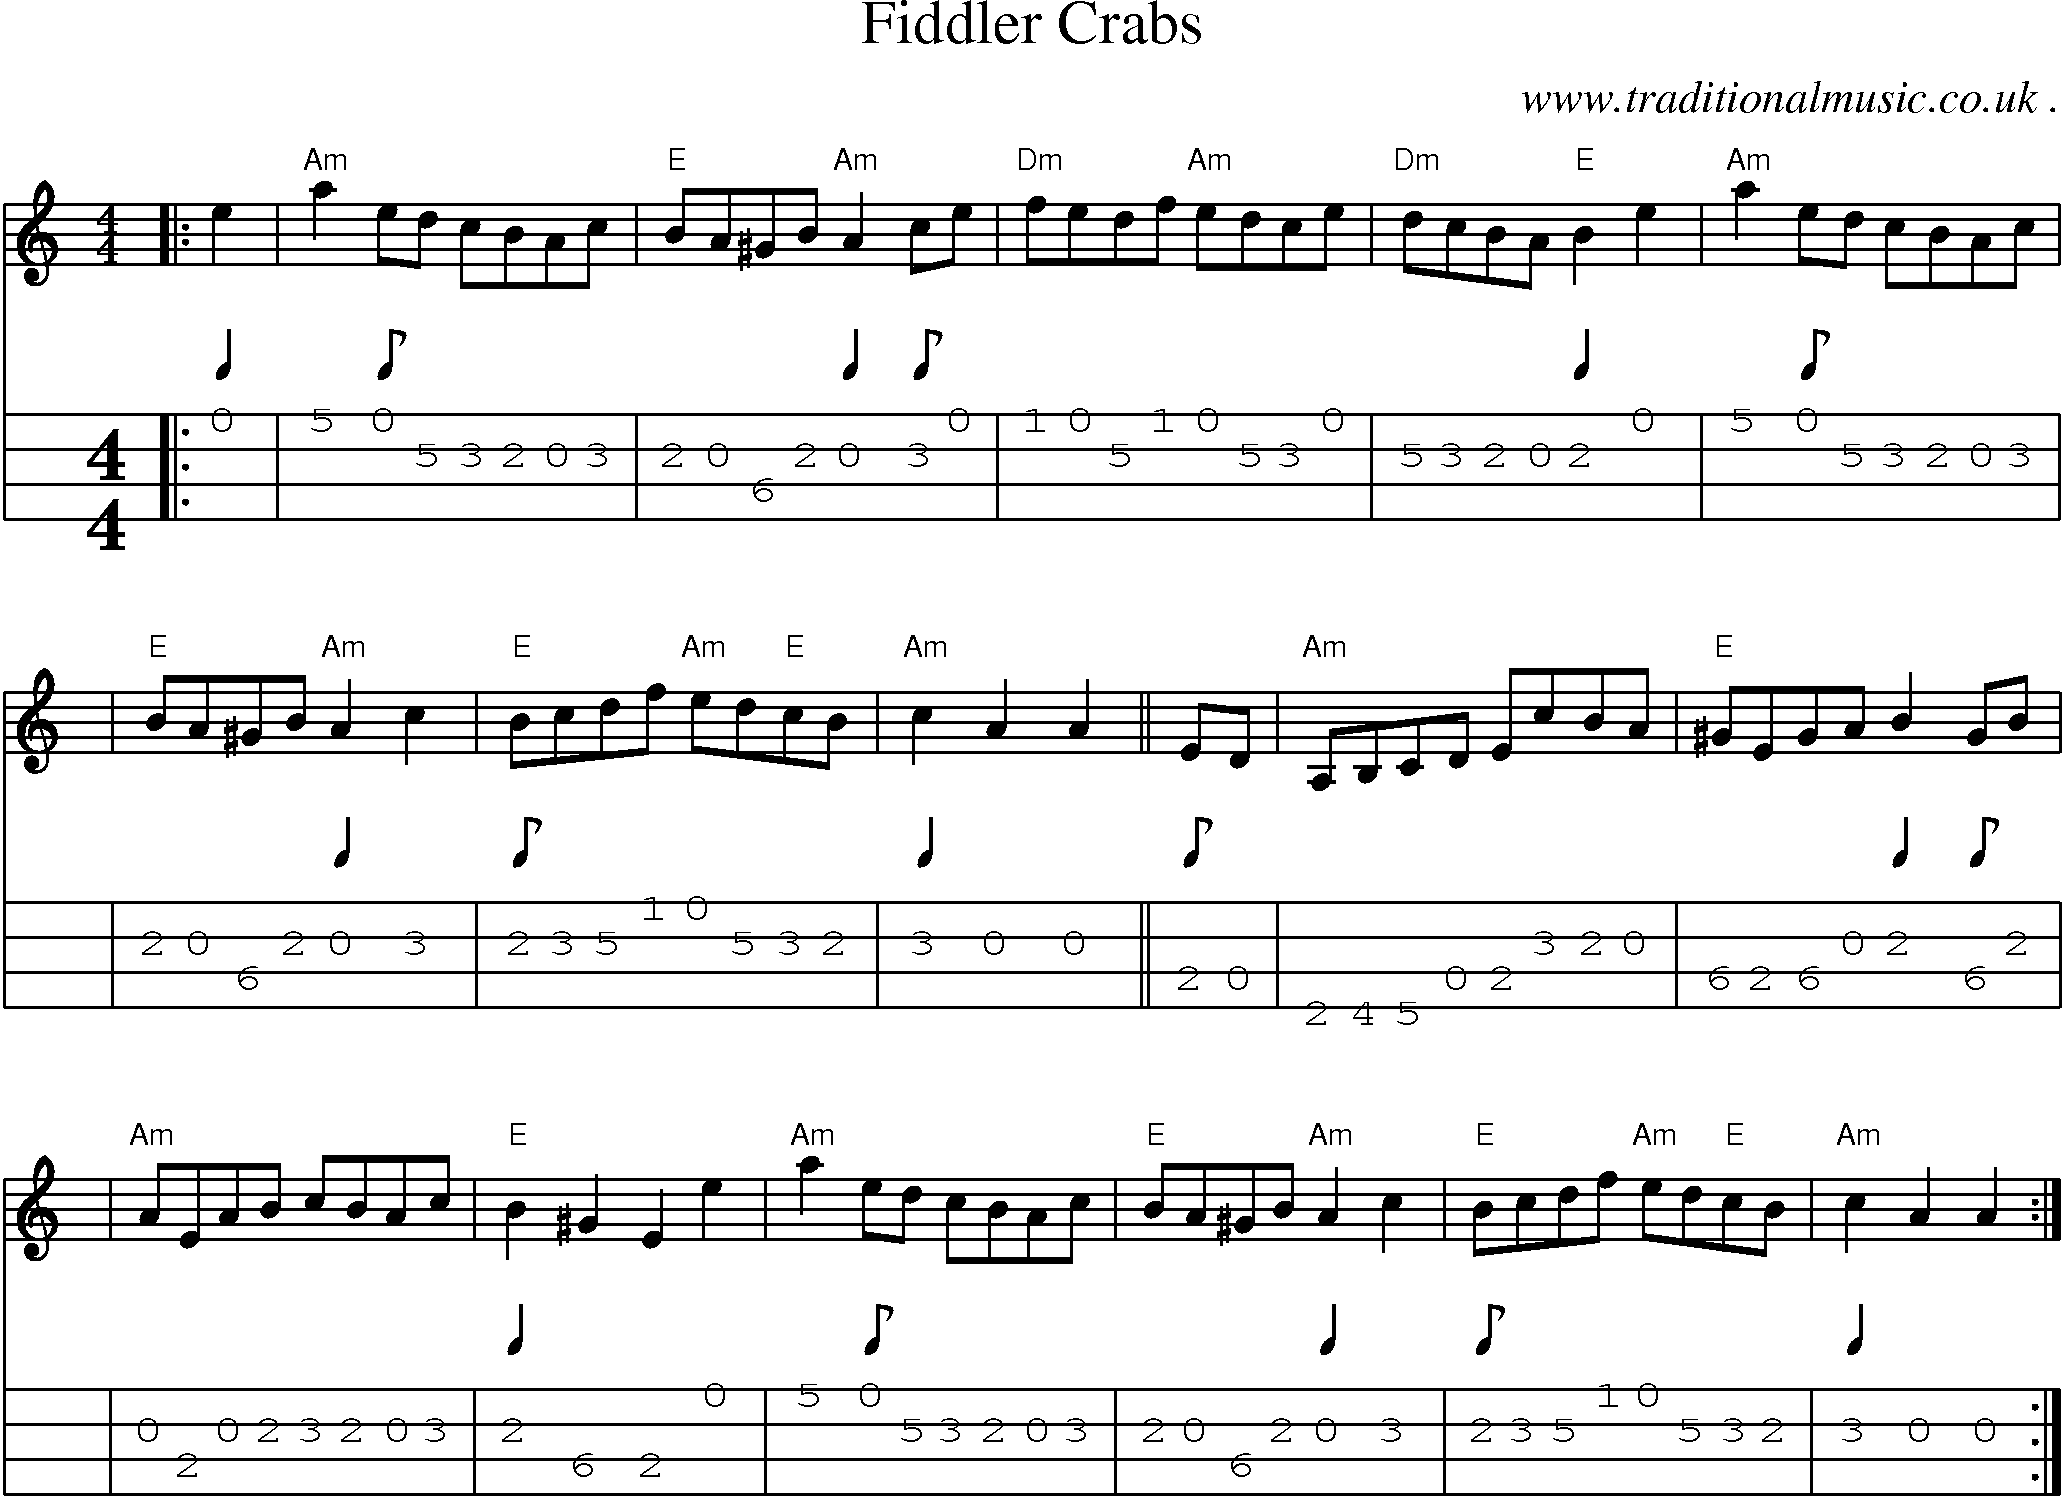 Sheet-music  score, Chords and Mandolin Tabs for Fiddler Crabs